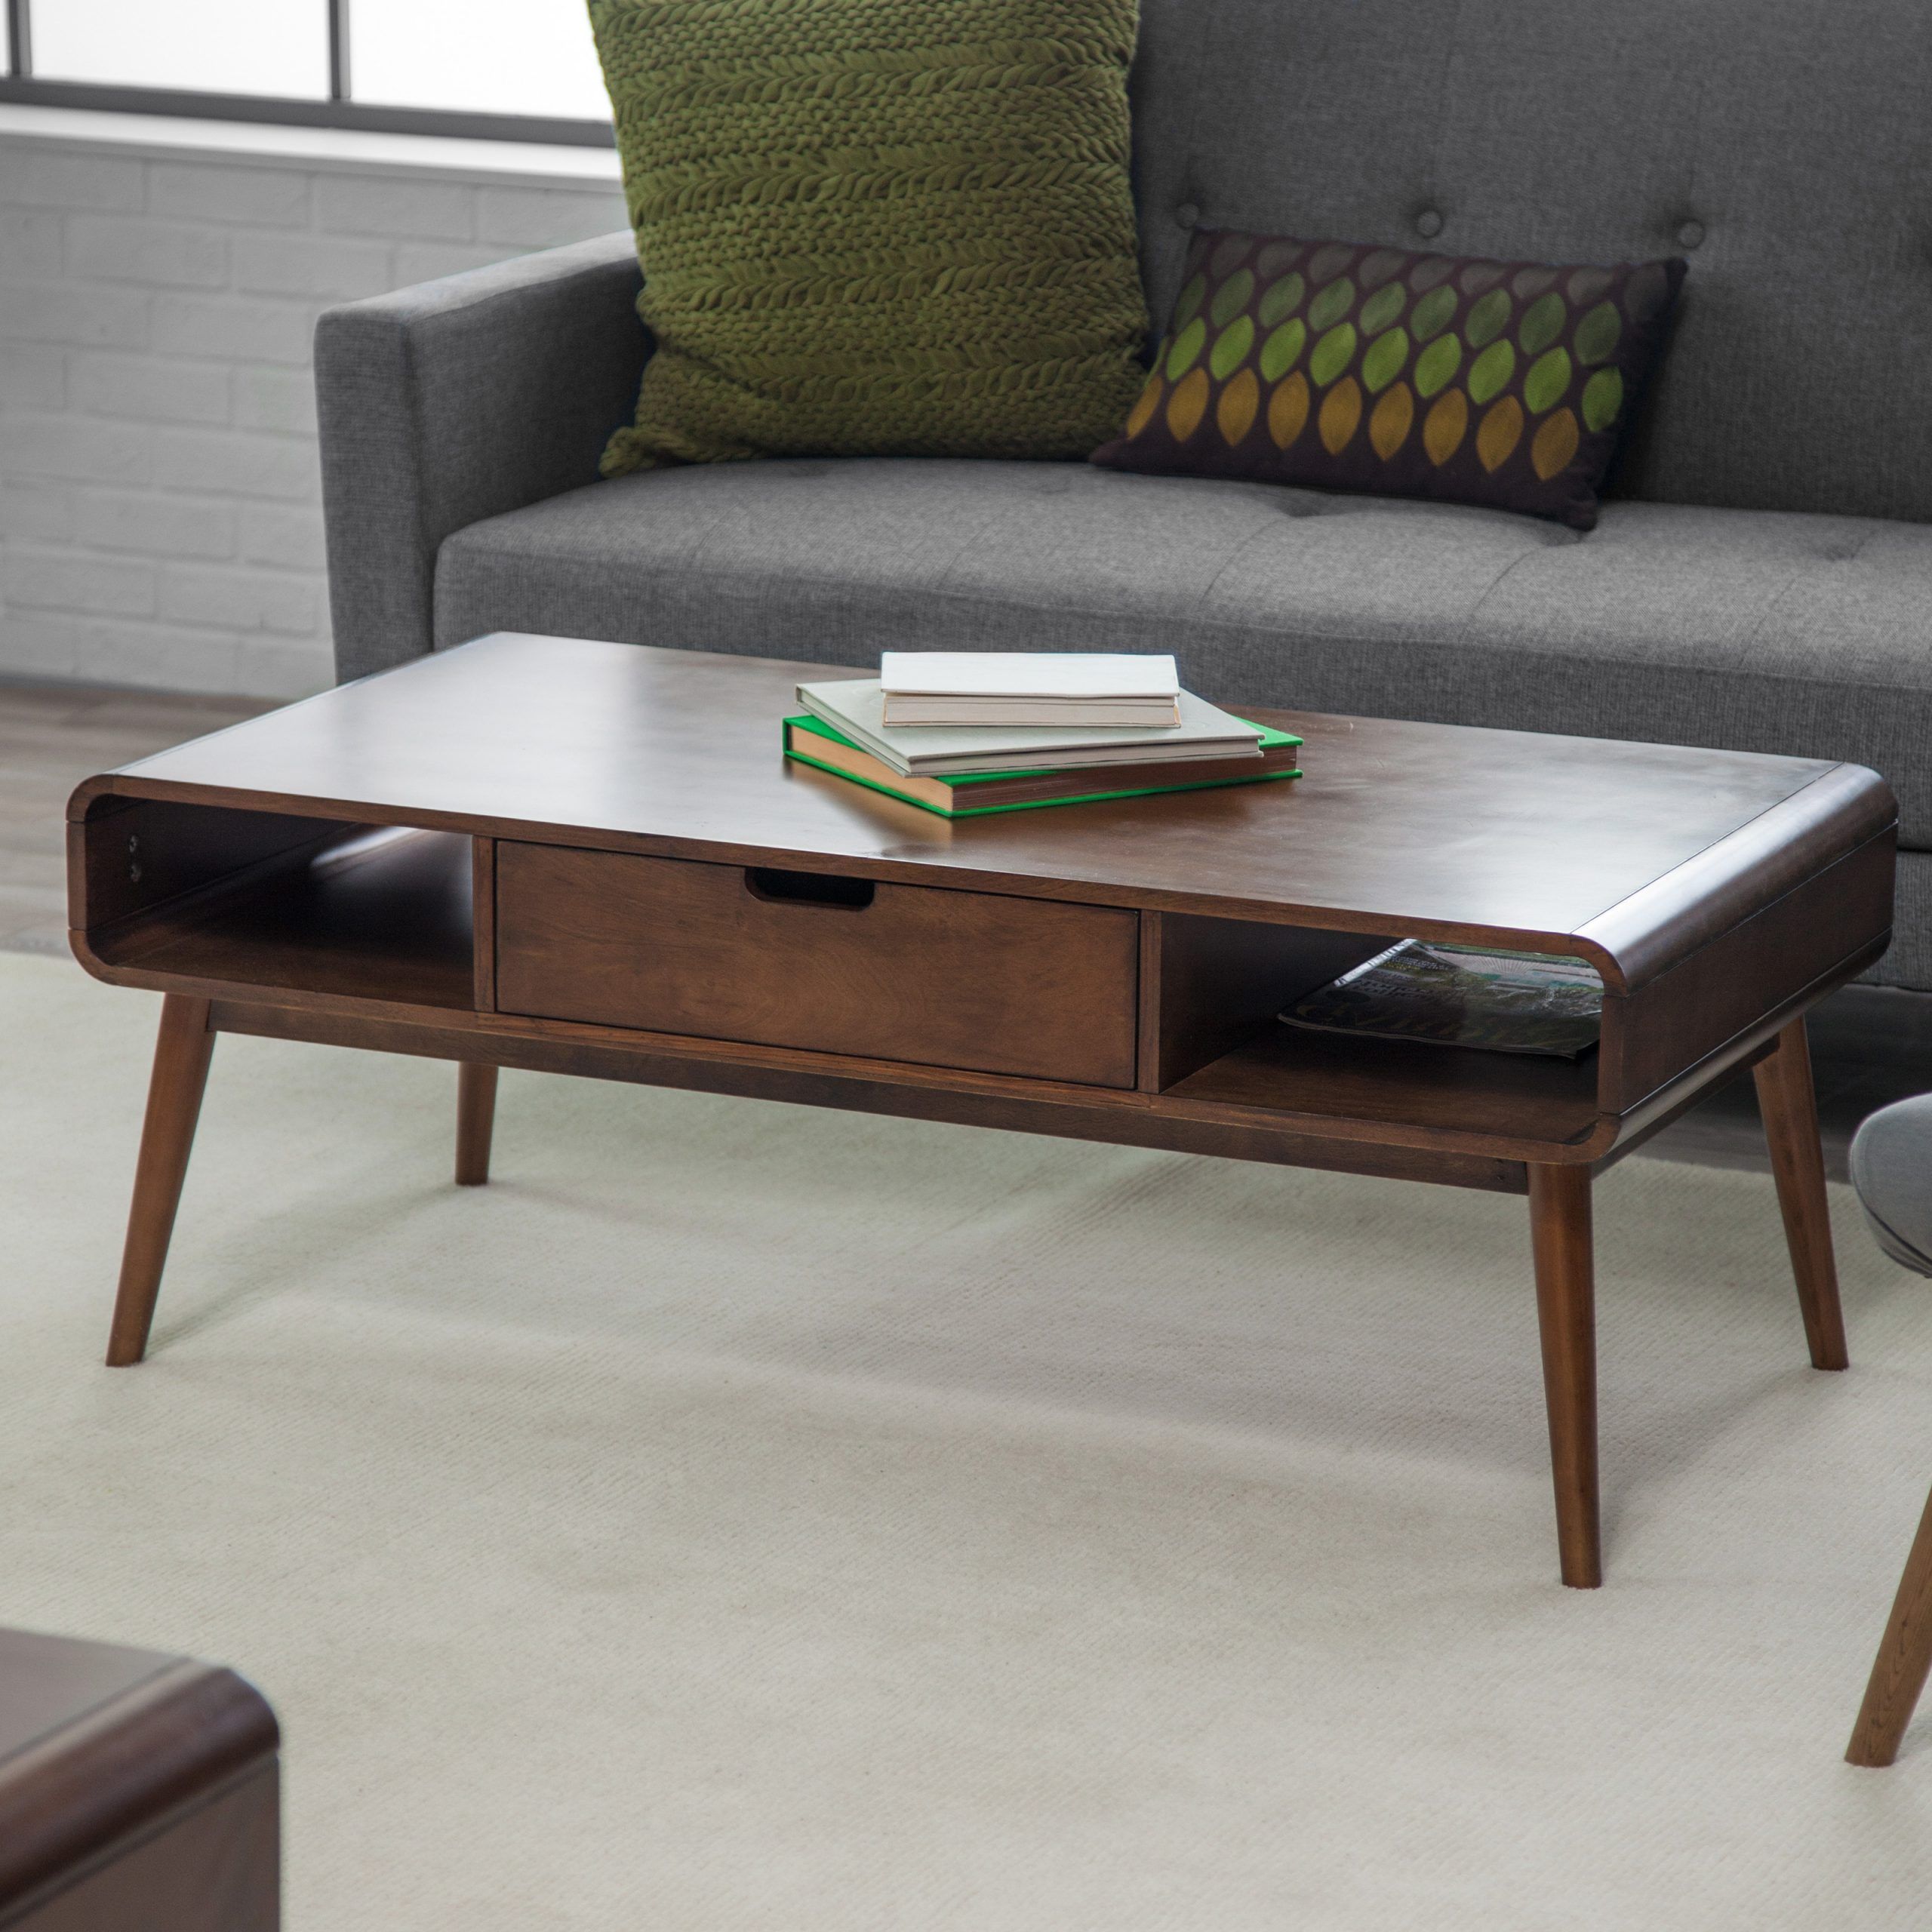 Belham Living Carter Mid Century Modern Coffee Table For Recent Geometric Glass Modern Coffee Tables (Gallery 3 of 20)